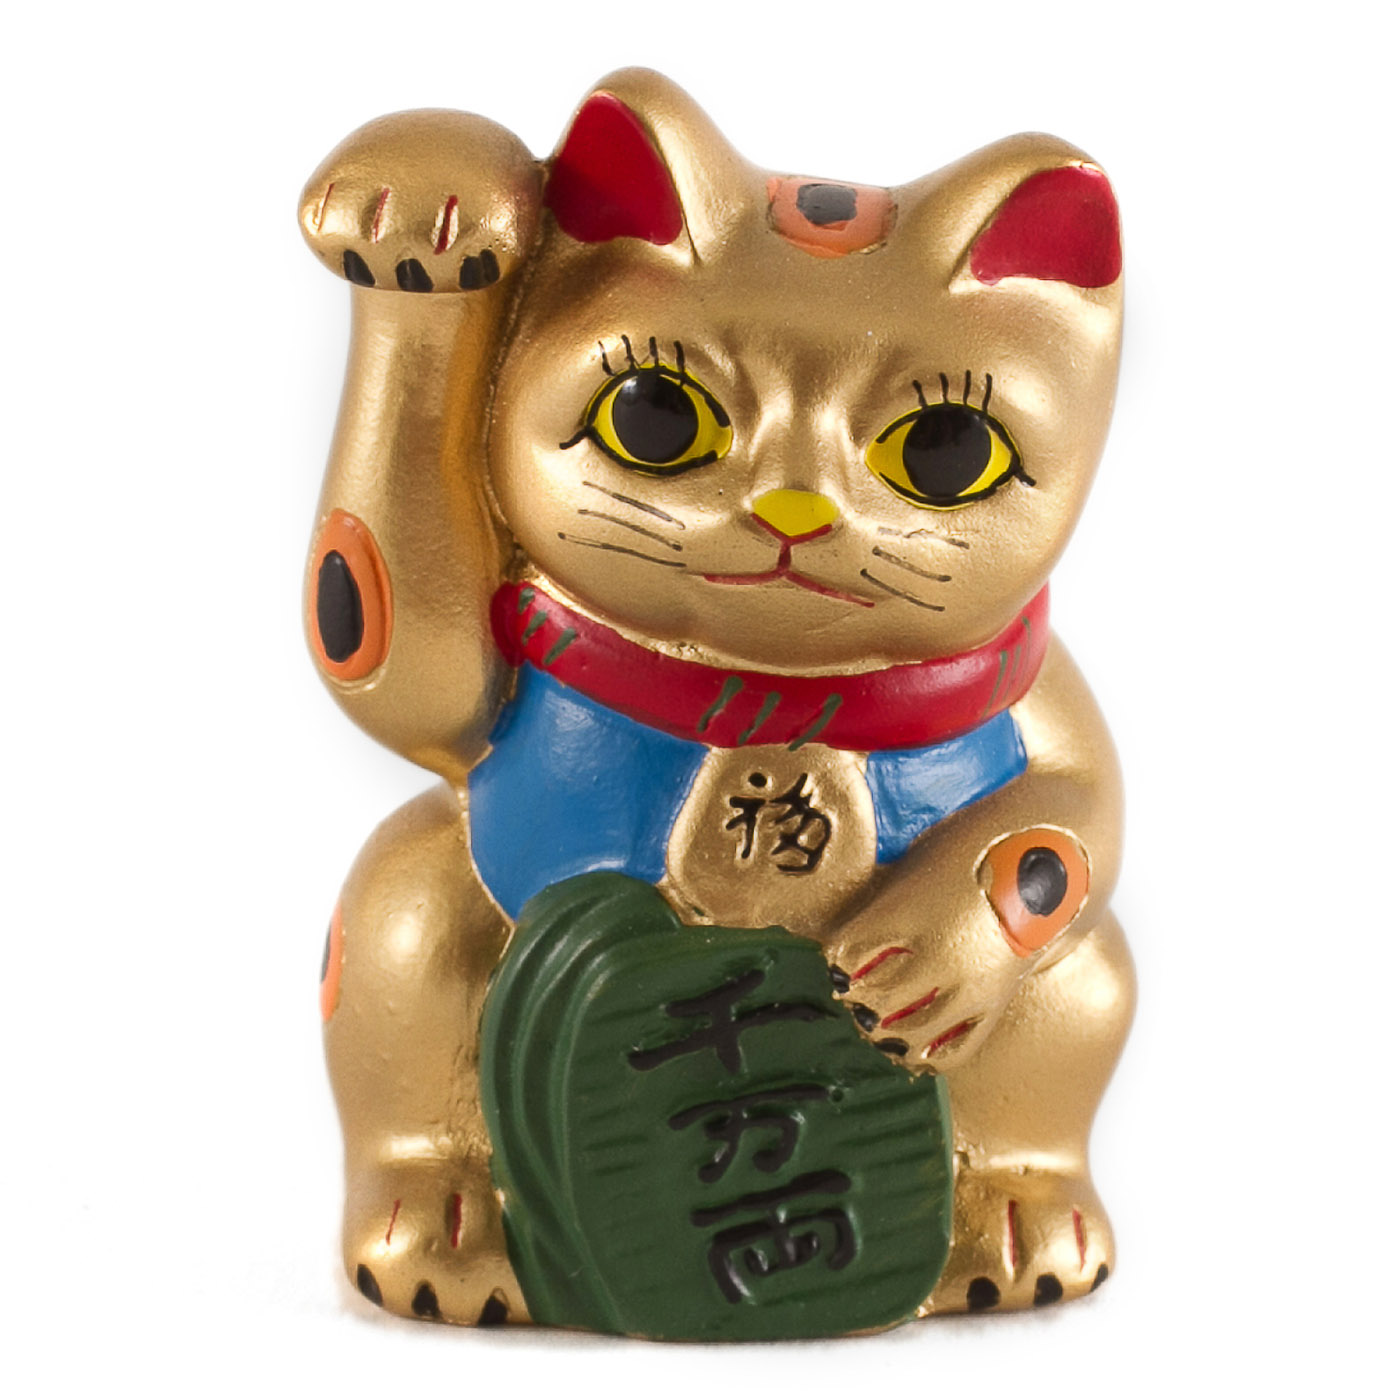 Discover Good Fortune with Lucky Cat Souvenirs from Japan